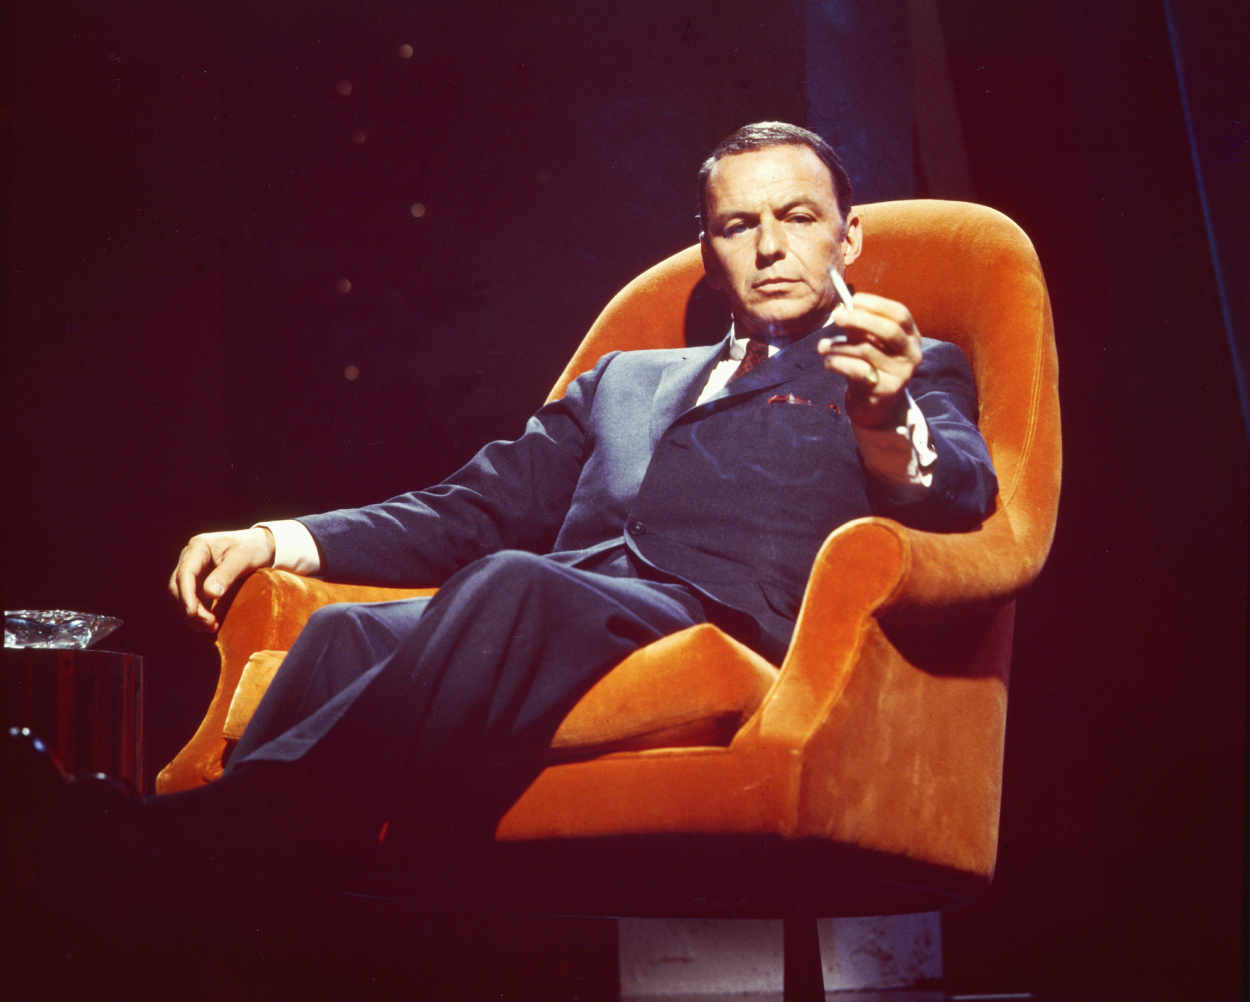 Frank Sinatra poses for a photo in an armchair